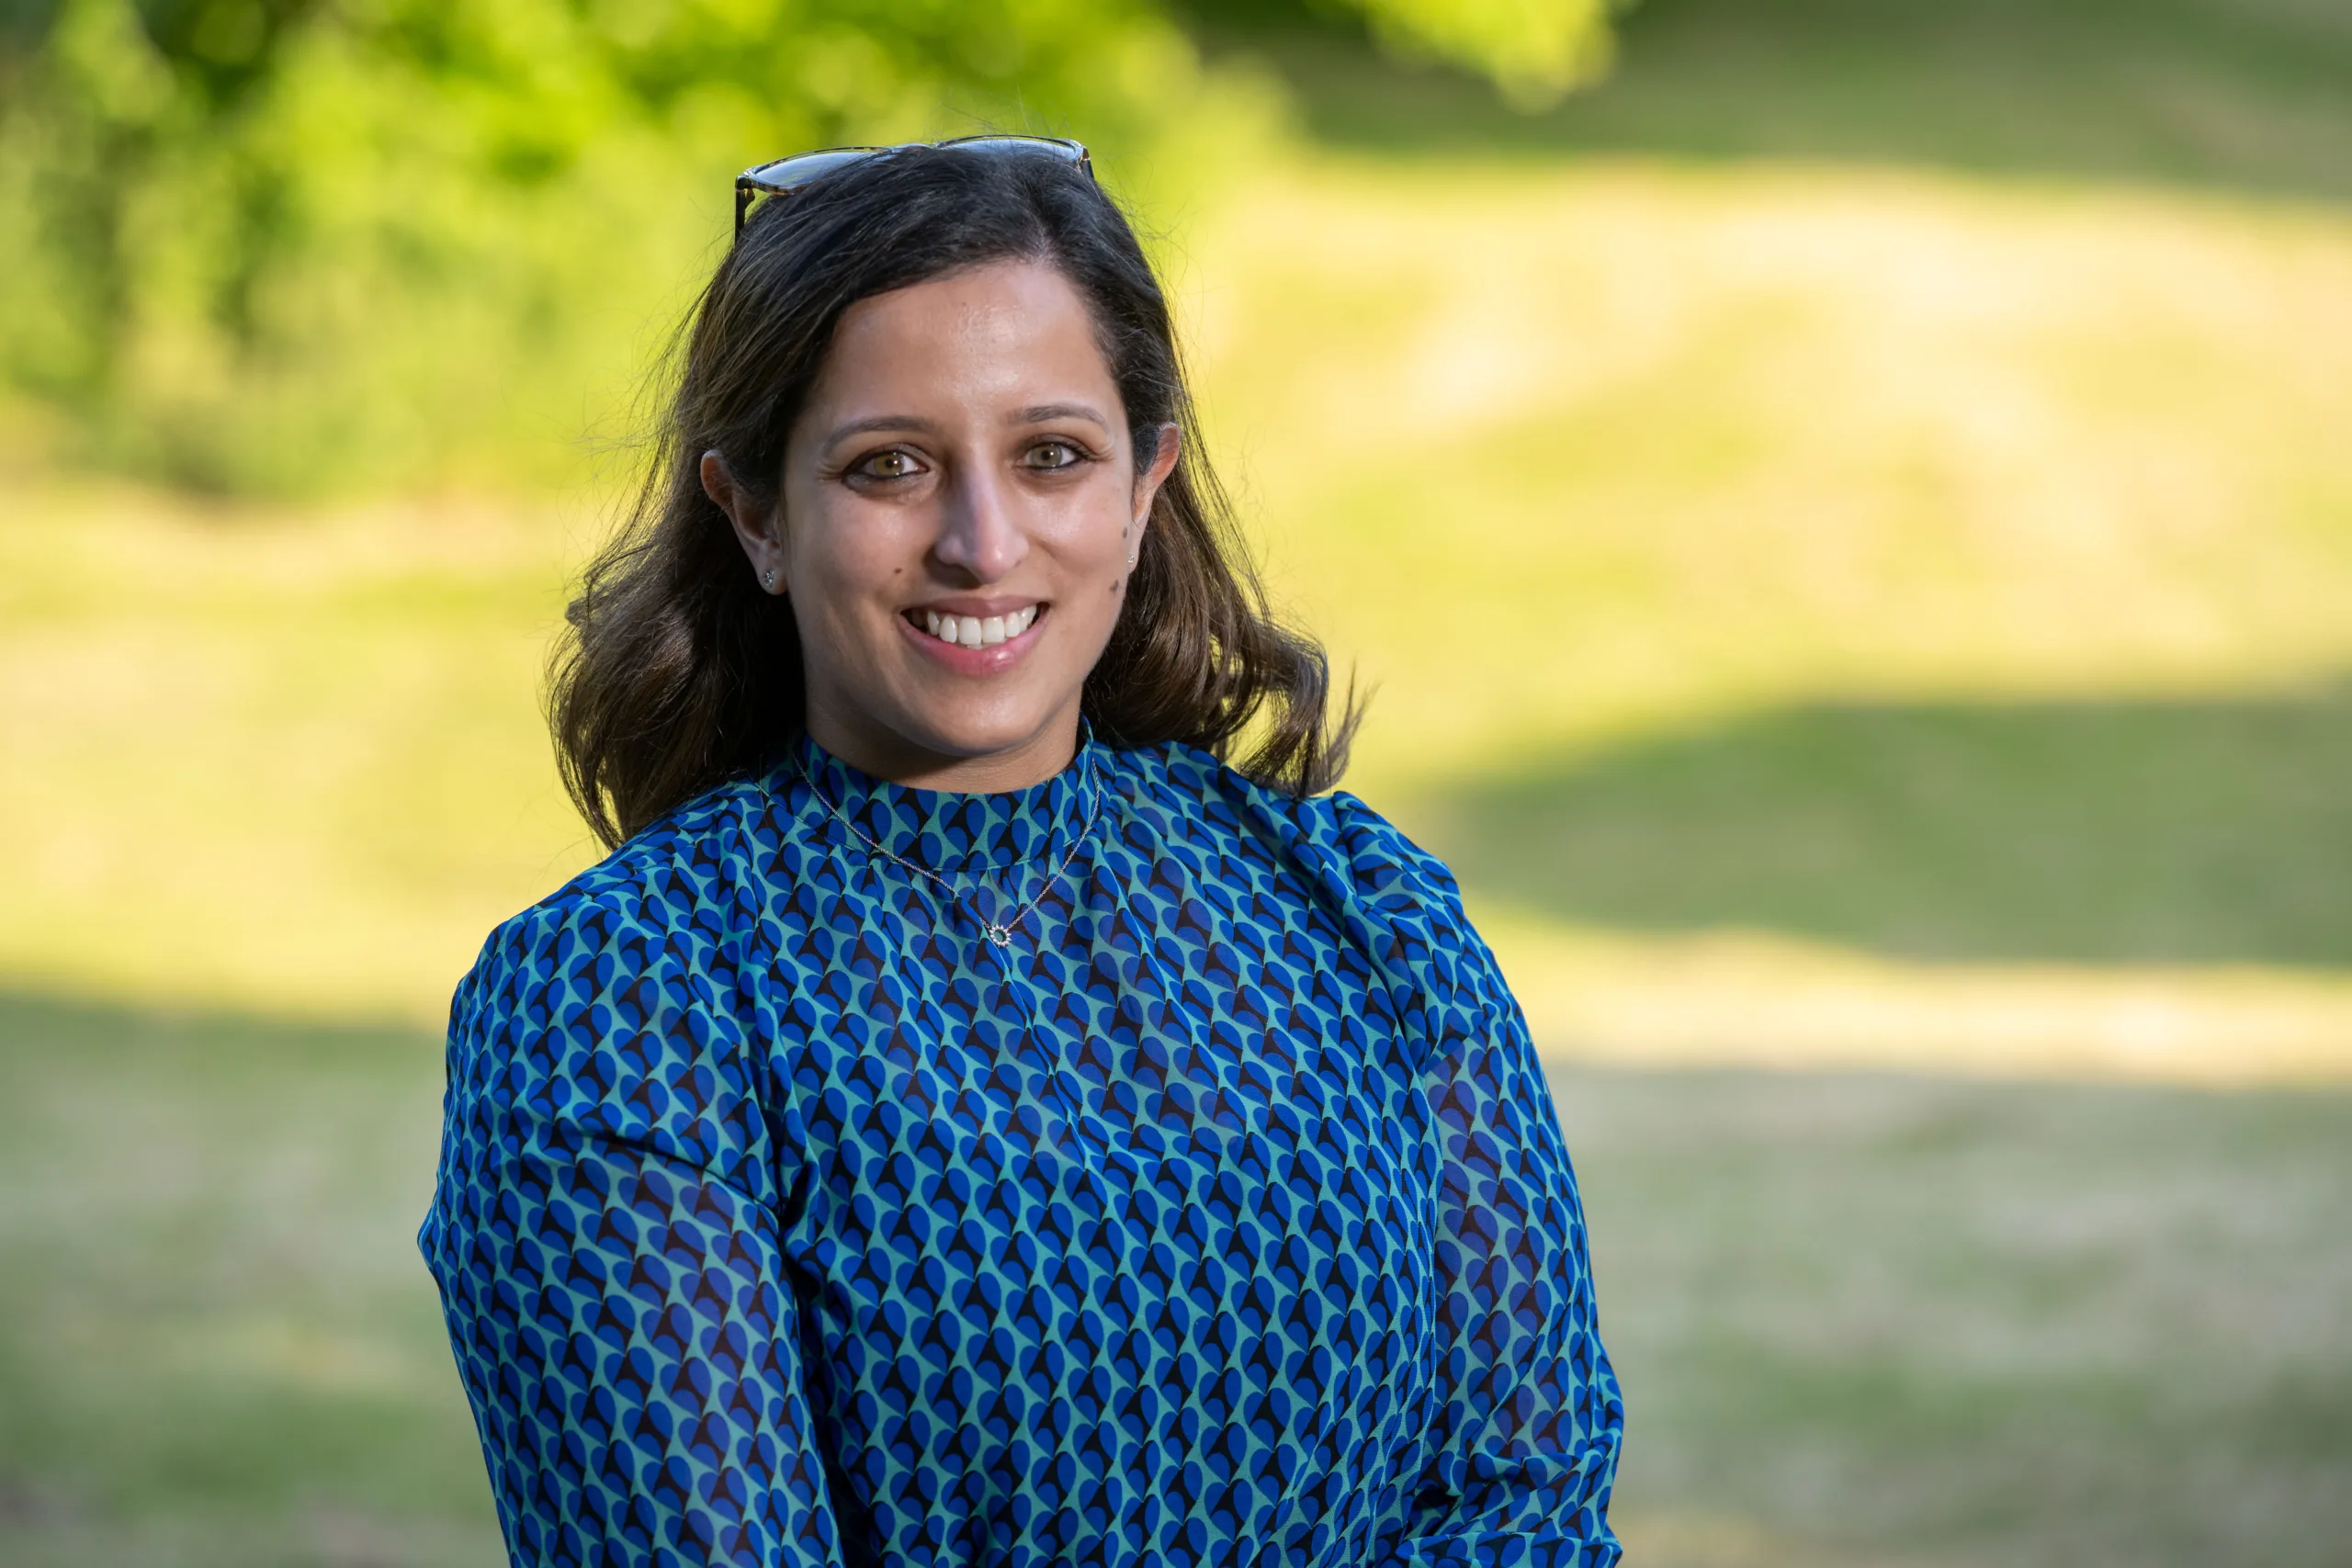 Bourn Hall has appointed Dr Shreeya Tewary, formerly a Research Fellow and then Clinical Lecturer at the Tommy’s Centre for Miscarriage Research, to support the development of a new Miscarriage Clinic, which is open to both couples and individuals even after a single miscarriage.